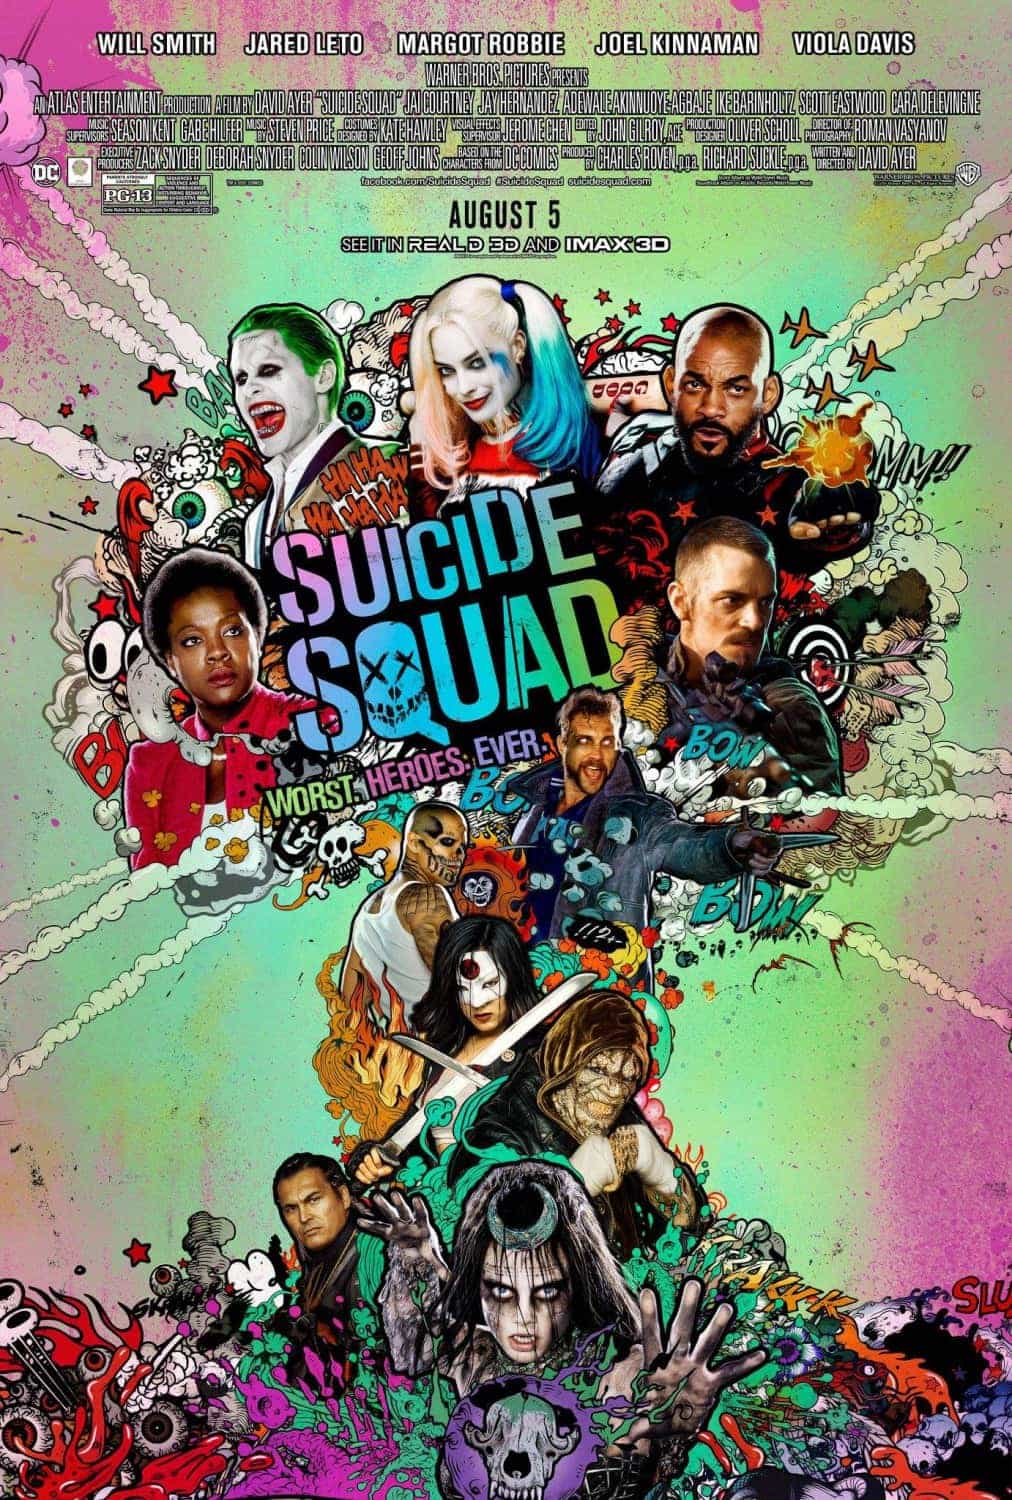 US Box Office Weekend 5th August 2016: Suicide Squad blasts to the top